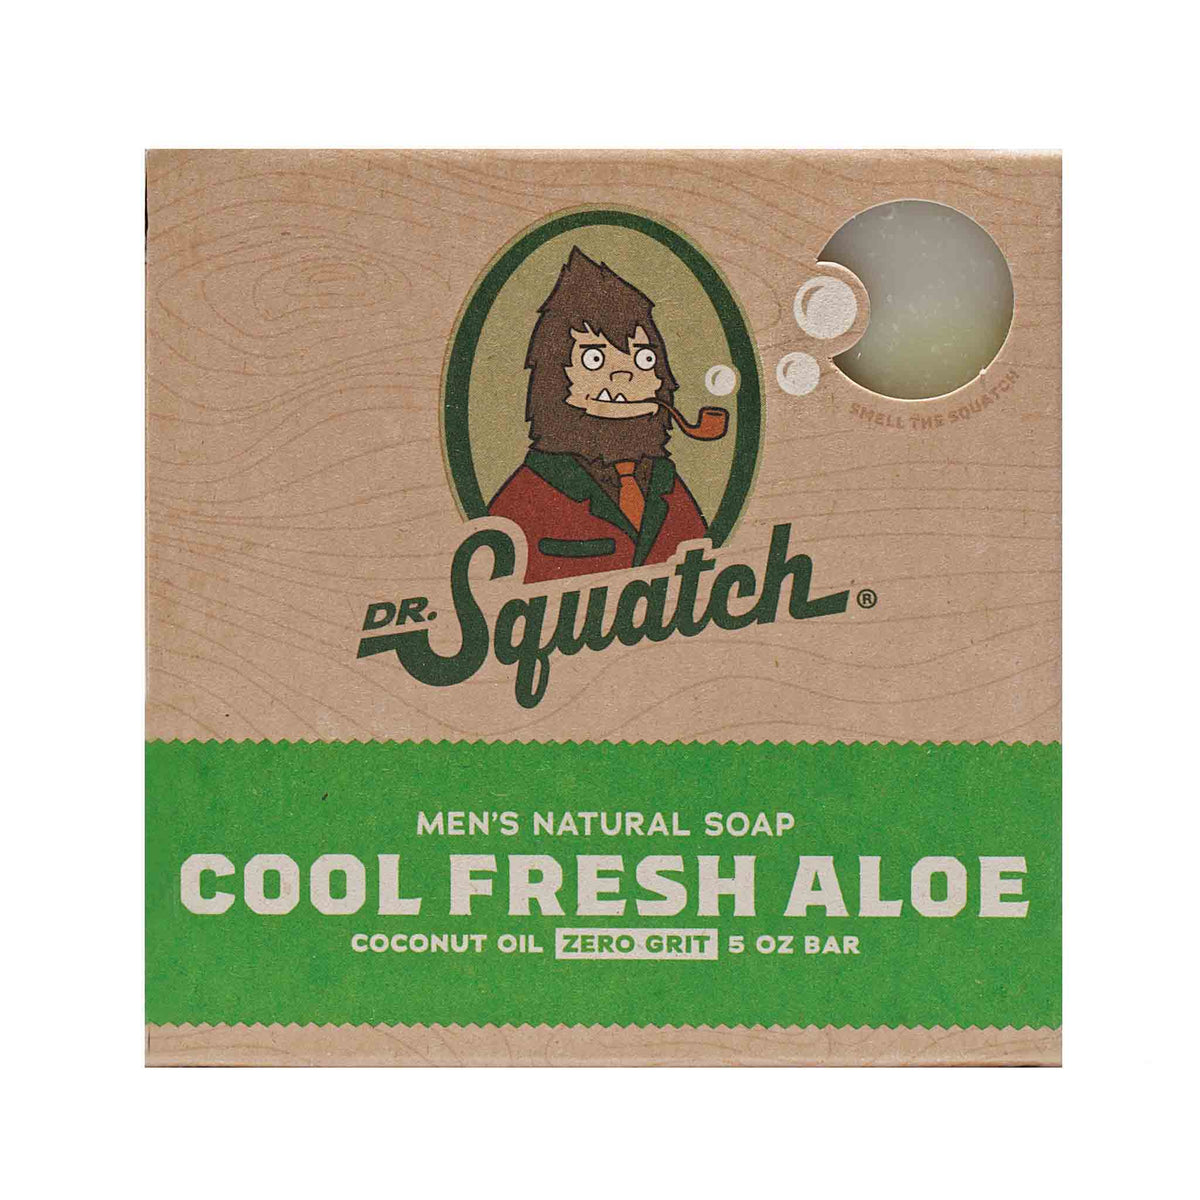 Dr. Squatch Natural Bar Soap for All Skin Types, Snowy Pine Tar, 5 oz